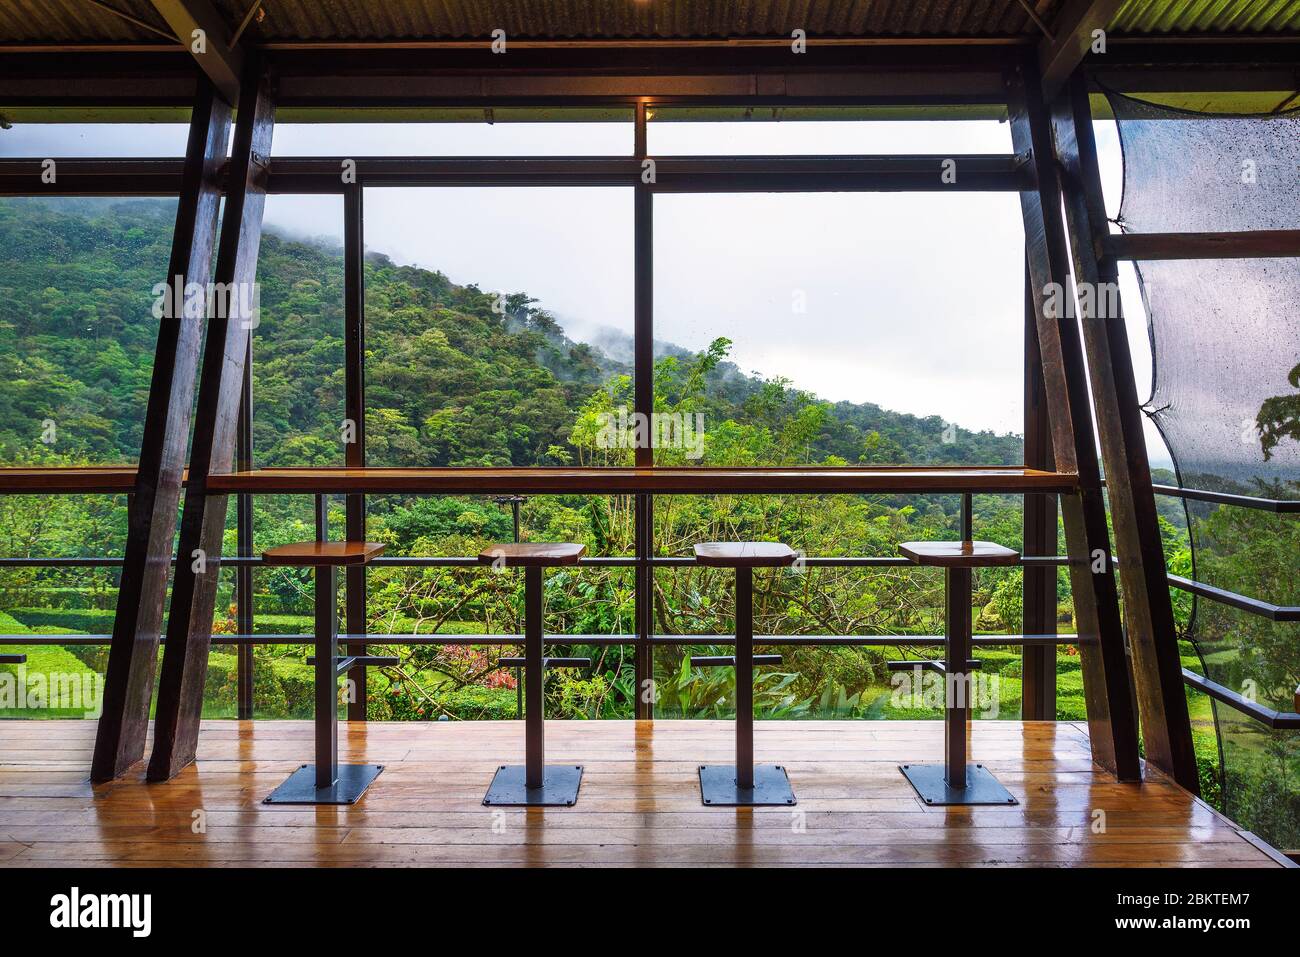 Interior of Celeste Mountain Lodge with views over rainforest in Costa Rica Stock Photo